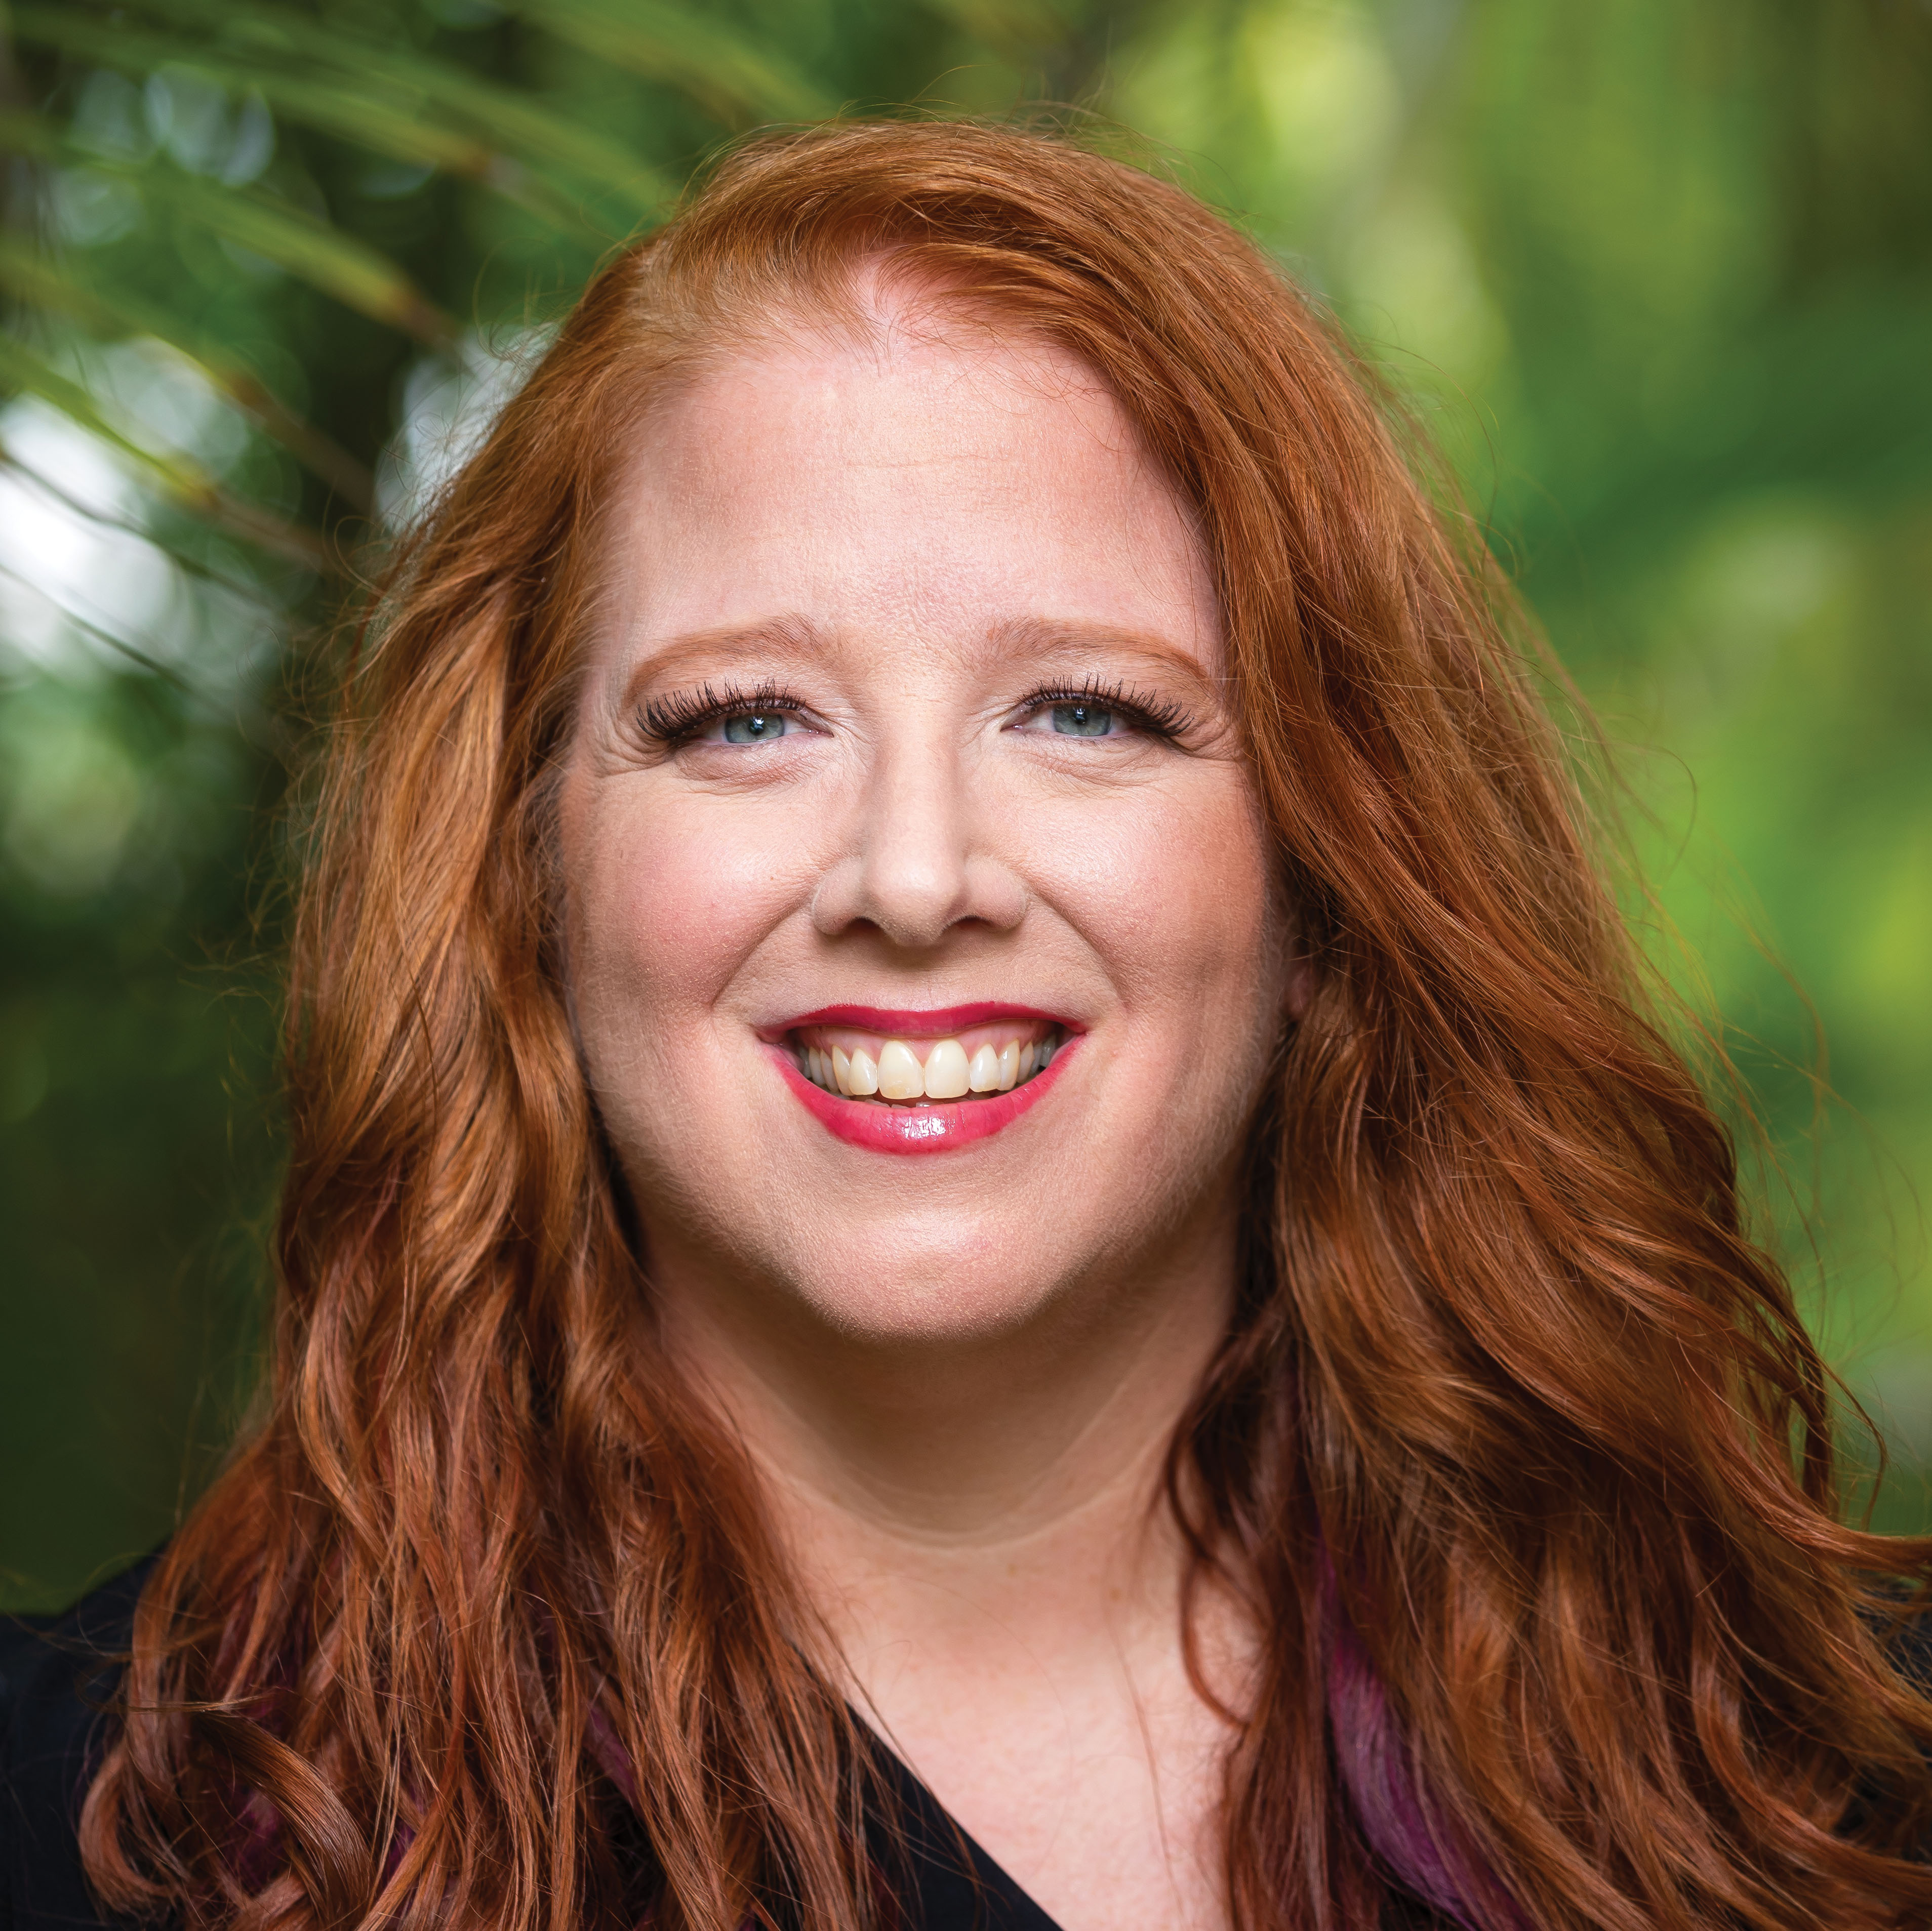 Jennifer Nash's headshot has green foliage in the background with the author wearing a black shirt. She has blue eyes and red hair.